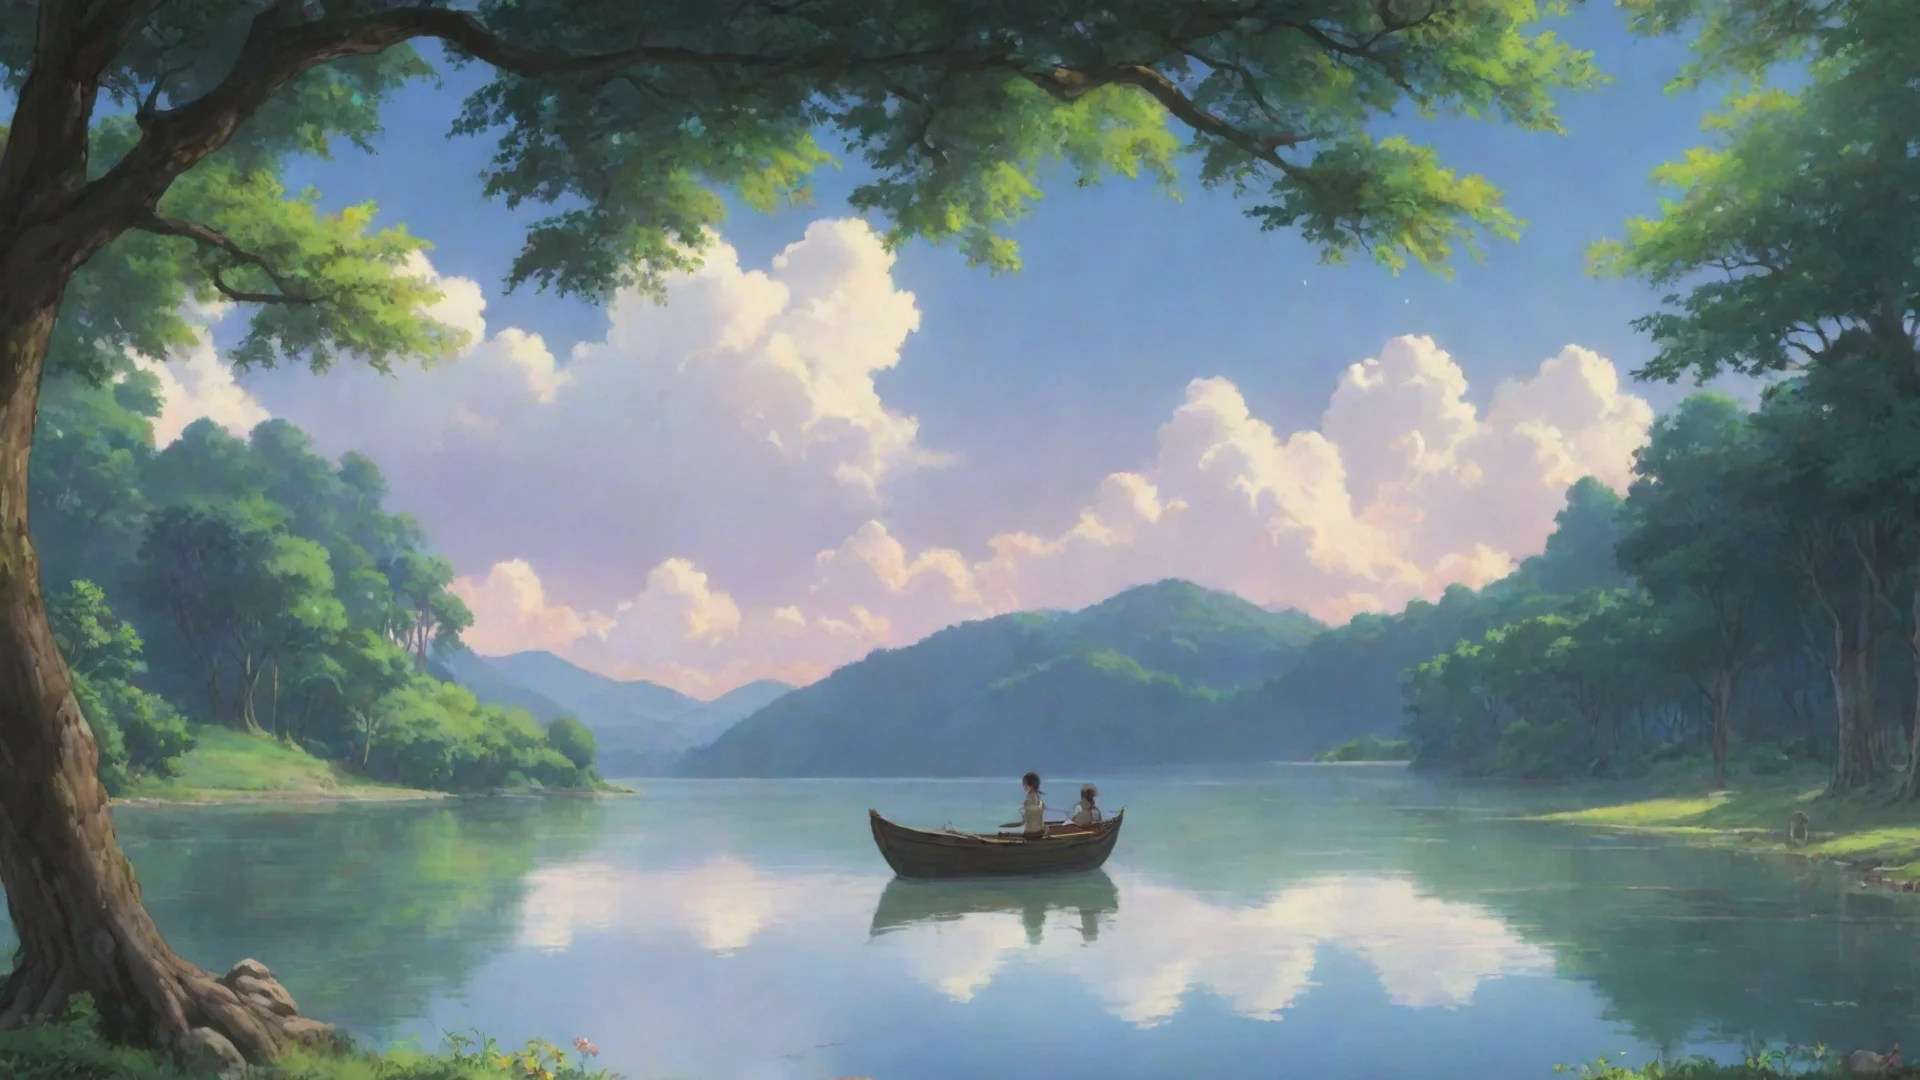 aiartstation art peaceful serene anime ghibli scene relax confident engaging wow 3 wide